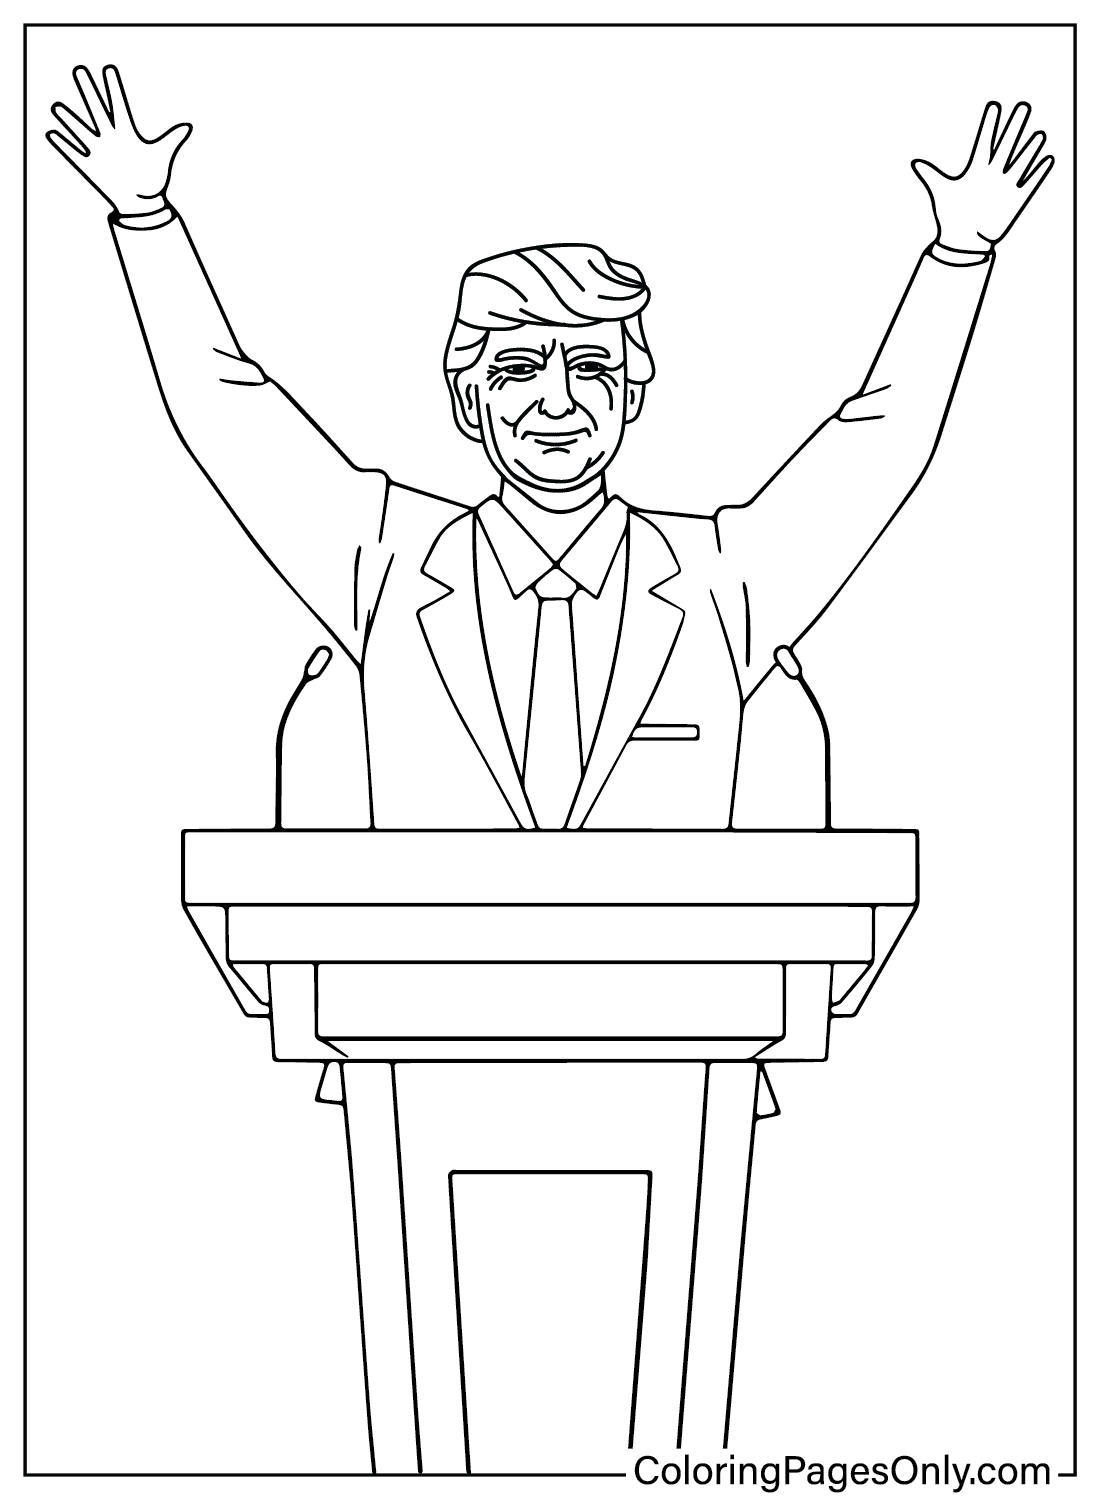 Donald Trump Coloring Page Free